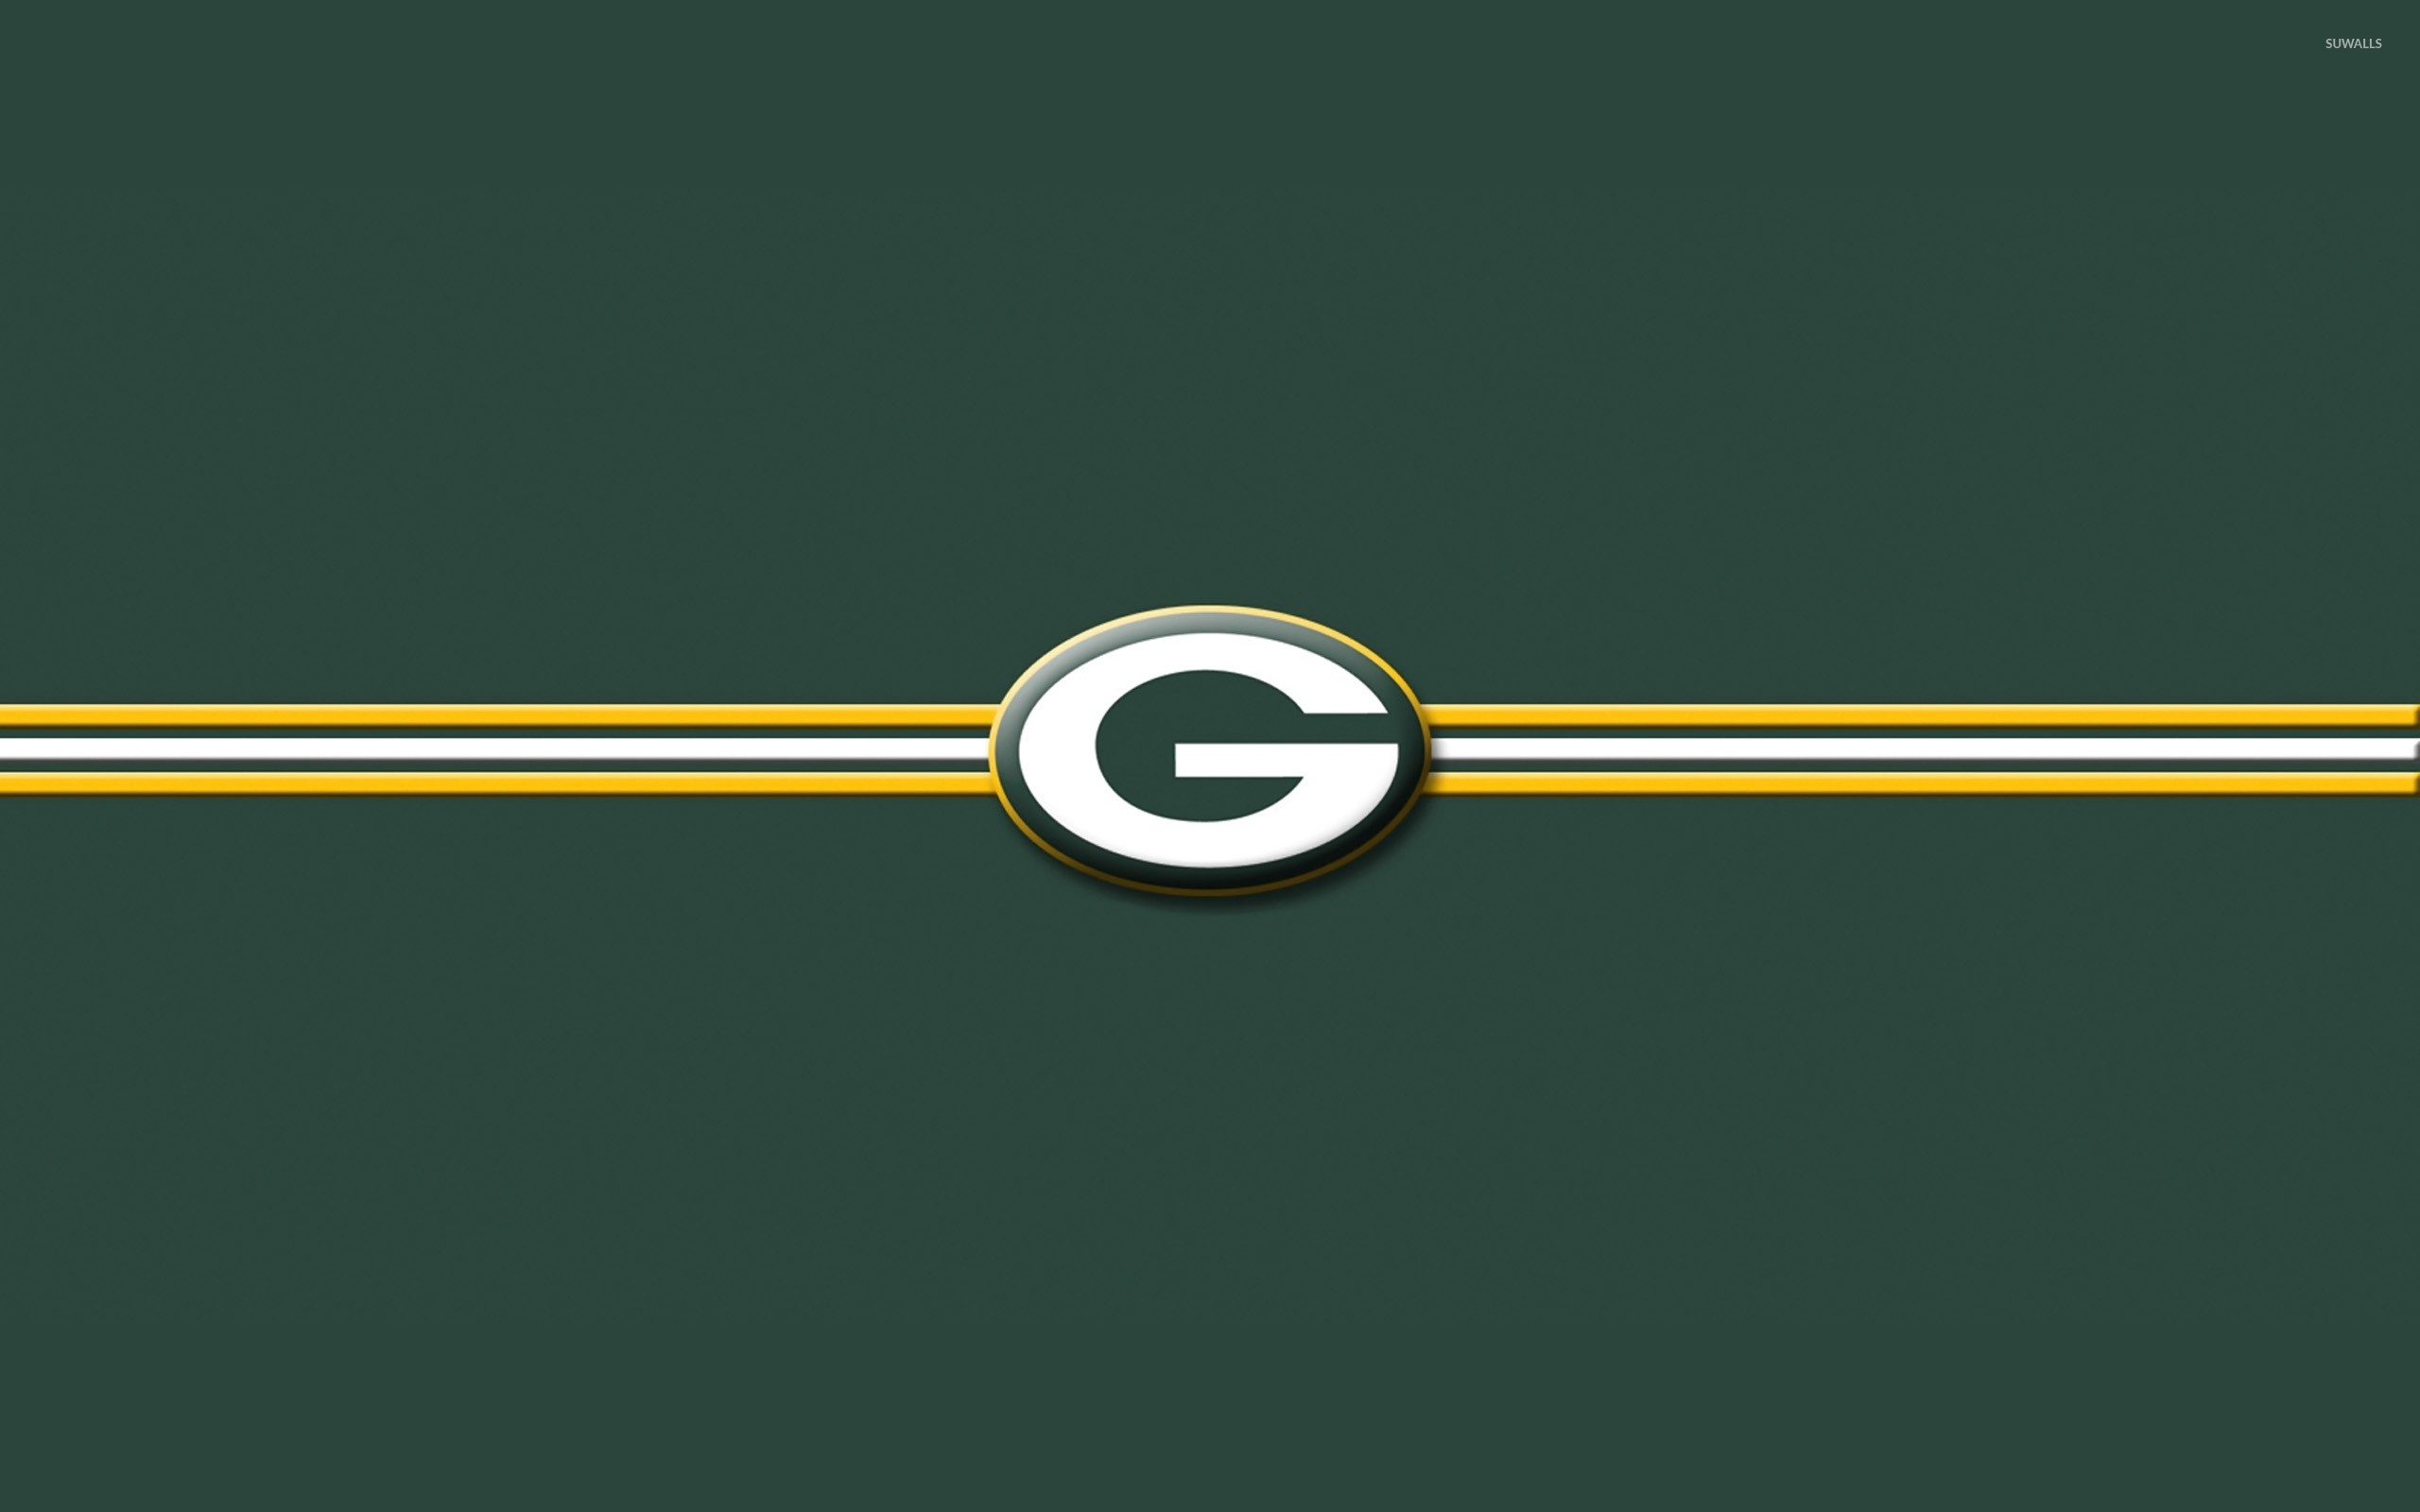 2560x1600 Green Bay Packers on green background wallpaper